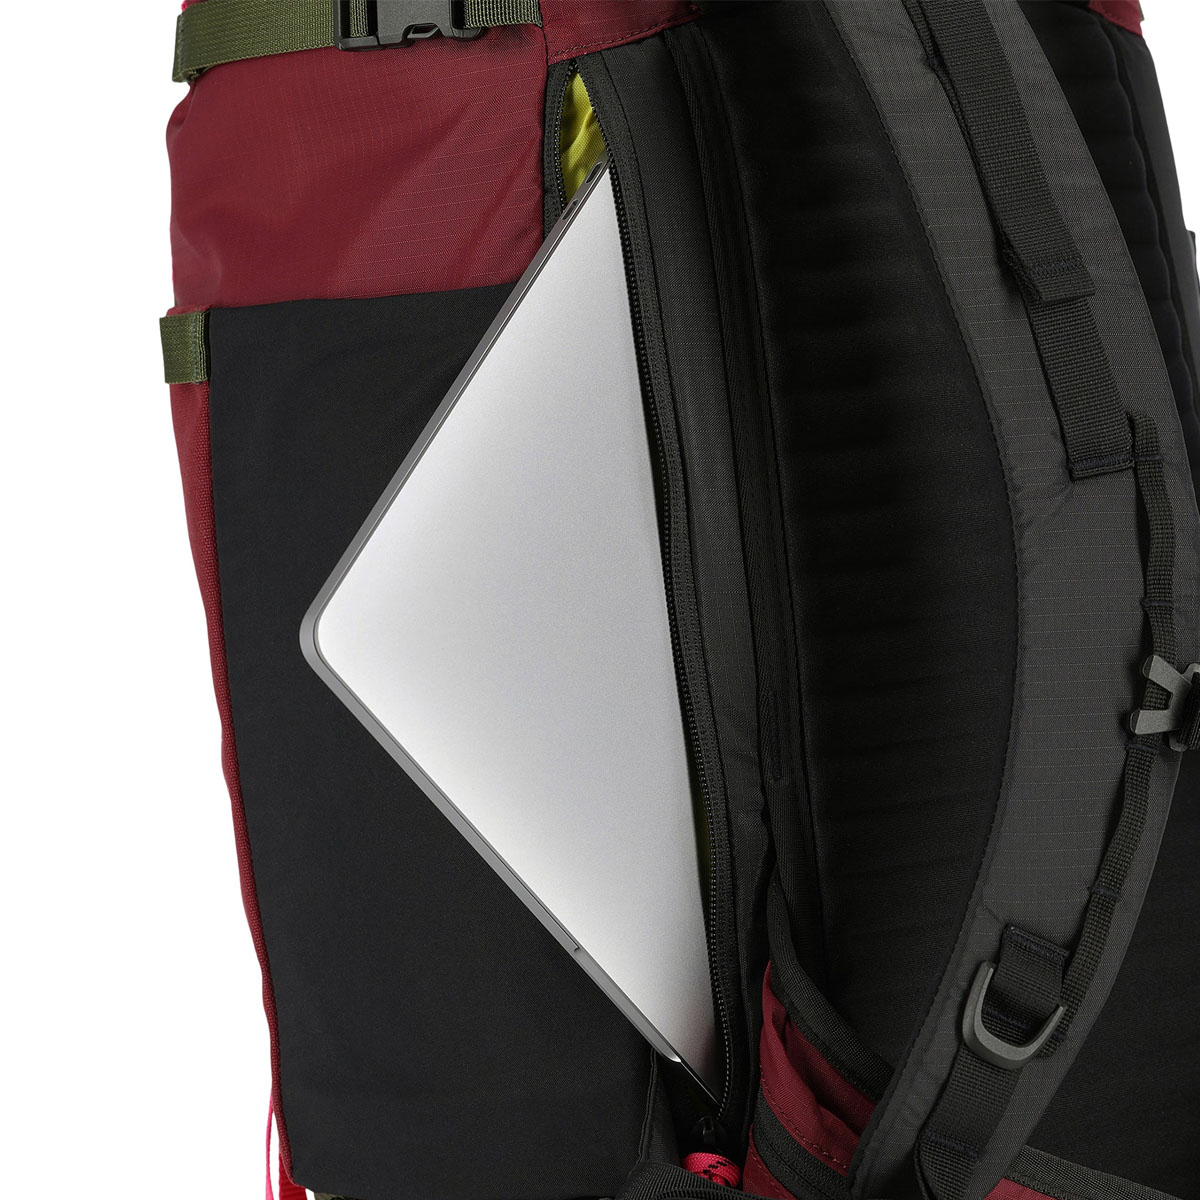 Topo Designs Mountain Pack 28L, with an internal laptop sleeve